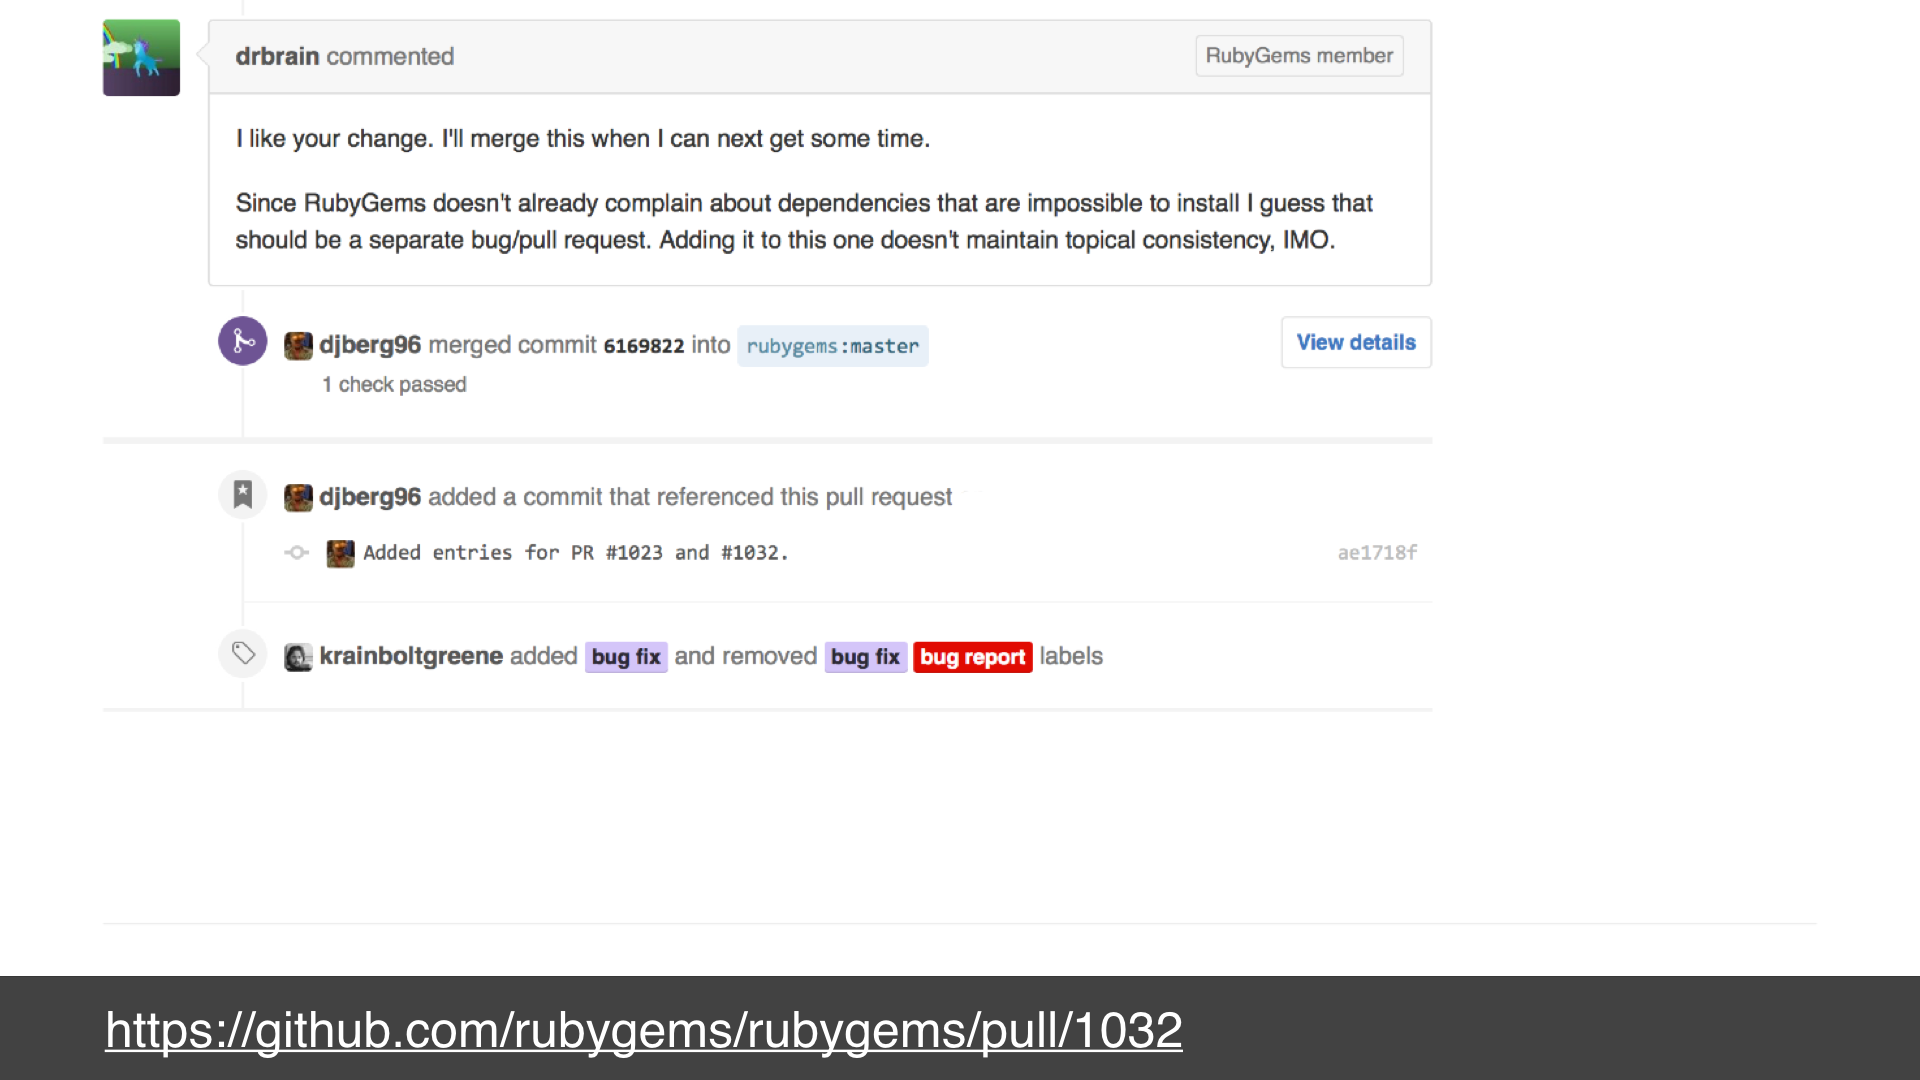 A screen shot of the issue I raised on github showing the thanks and merge comments from the maintainers - text: https://github.com/rubygems/rubygems/pull/1032